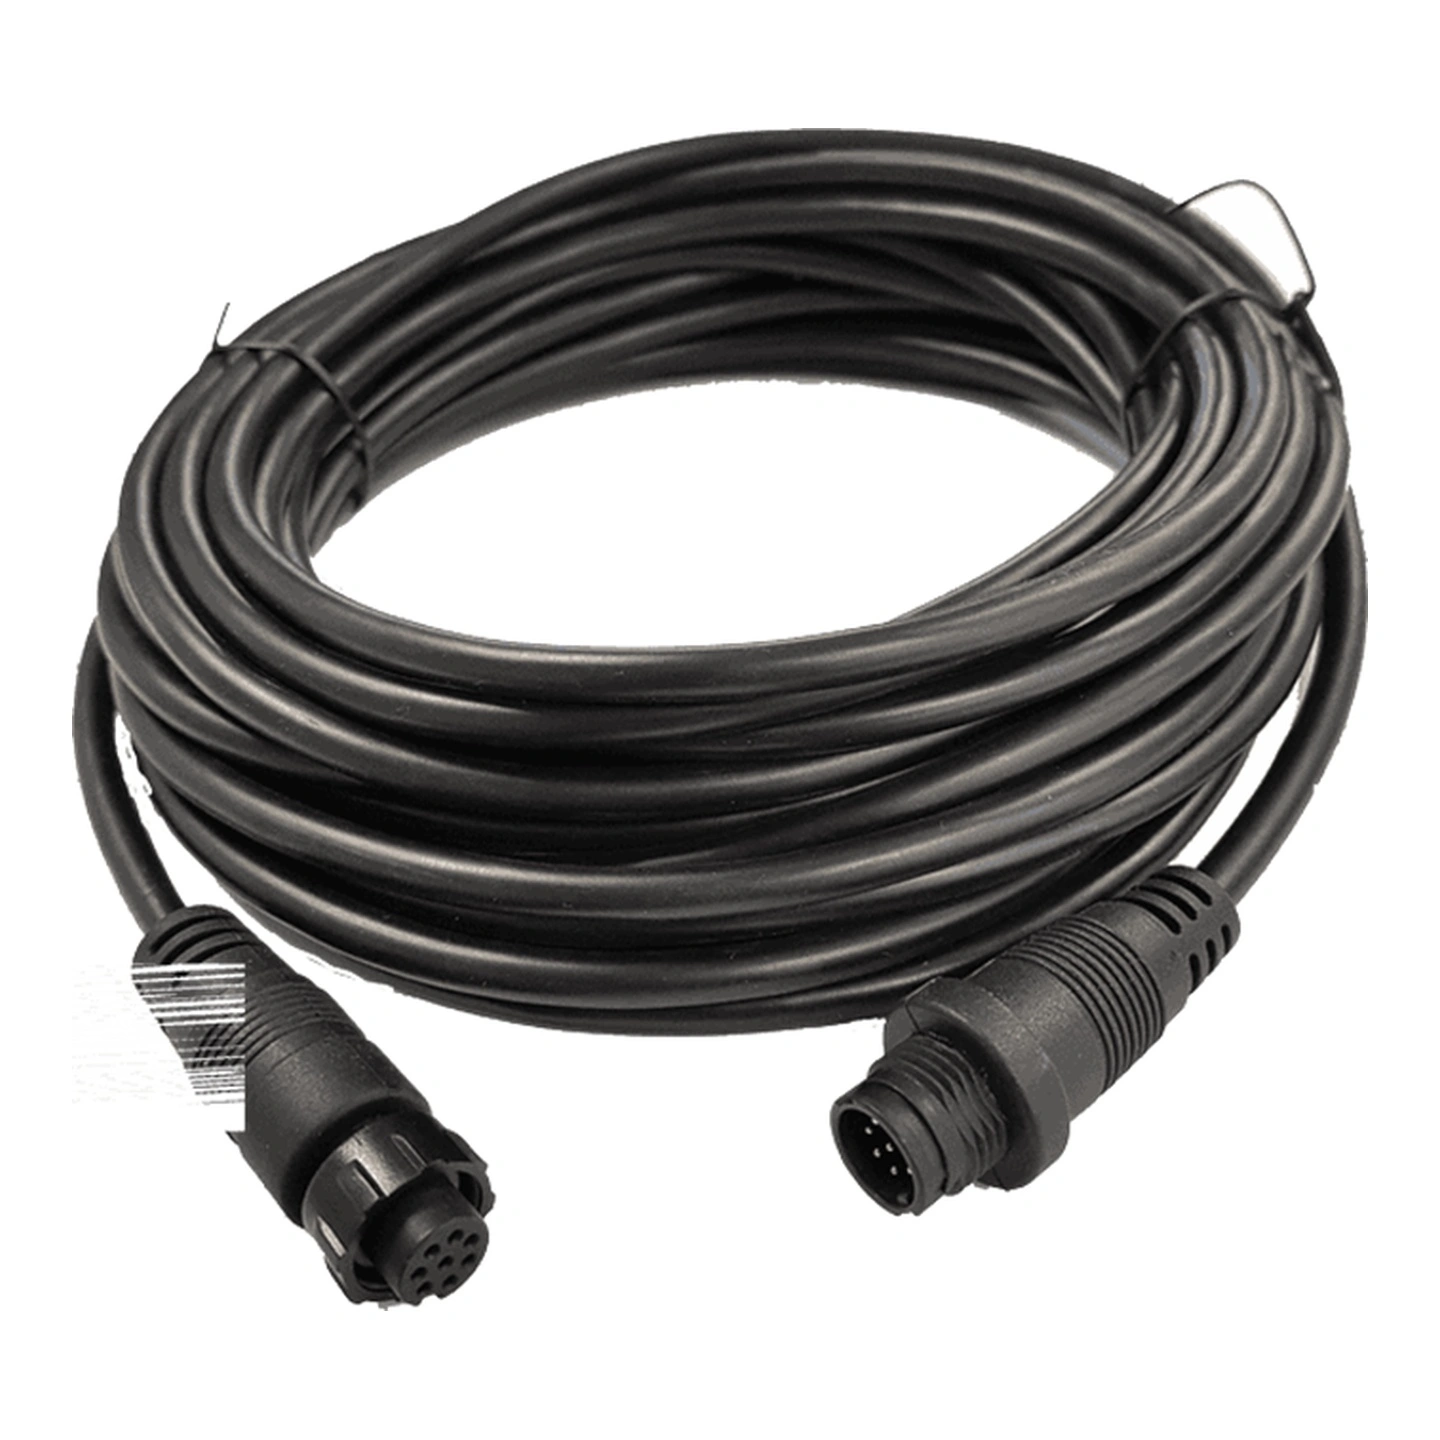 NAVICO VHF,FIST MIC EXT CABLE,10M